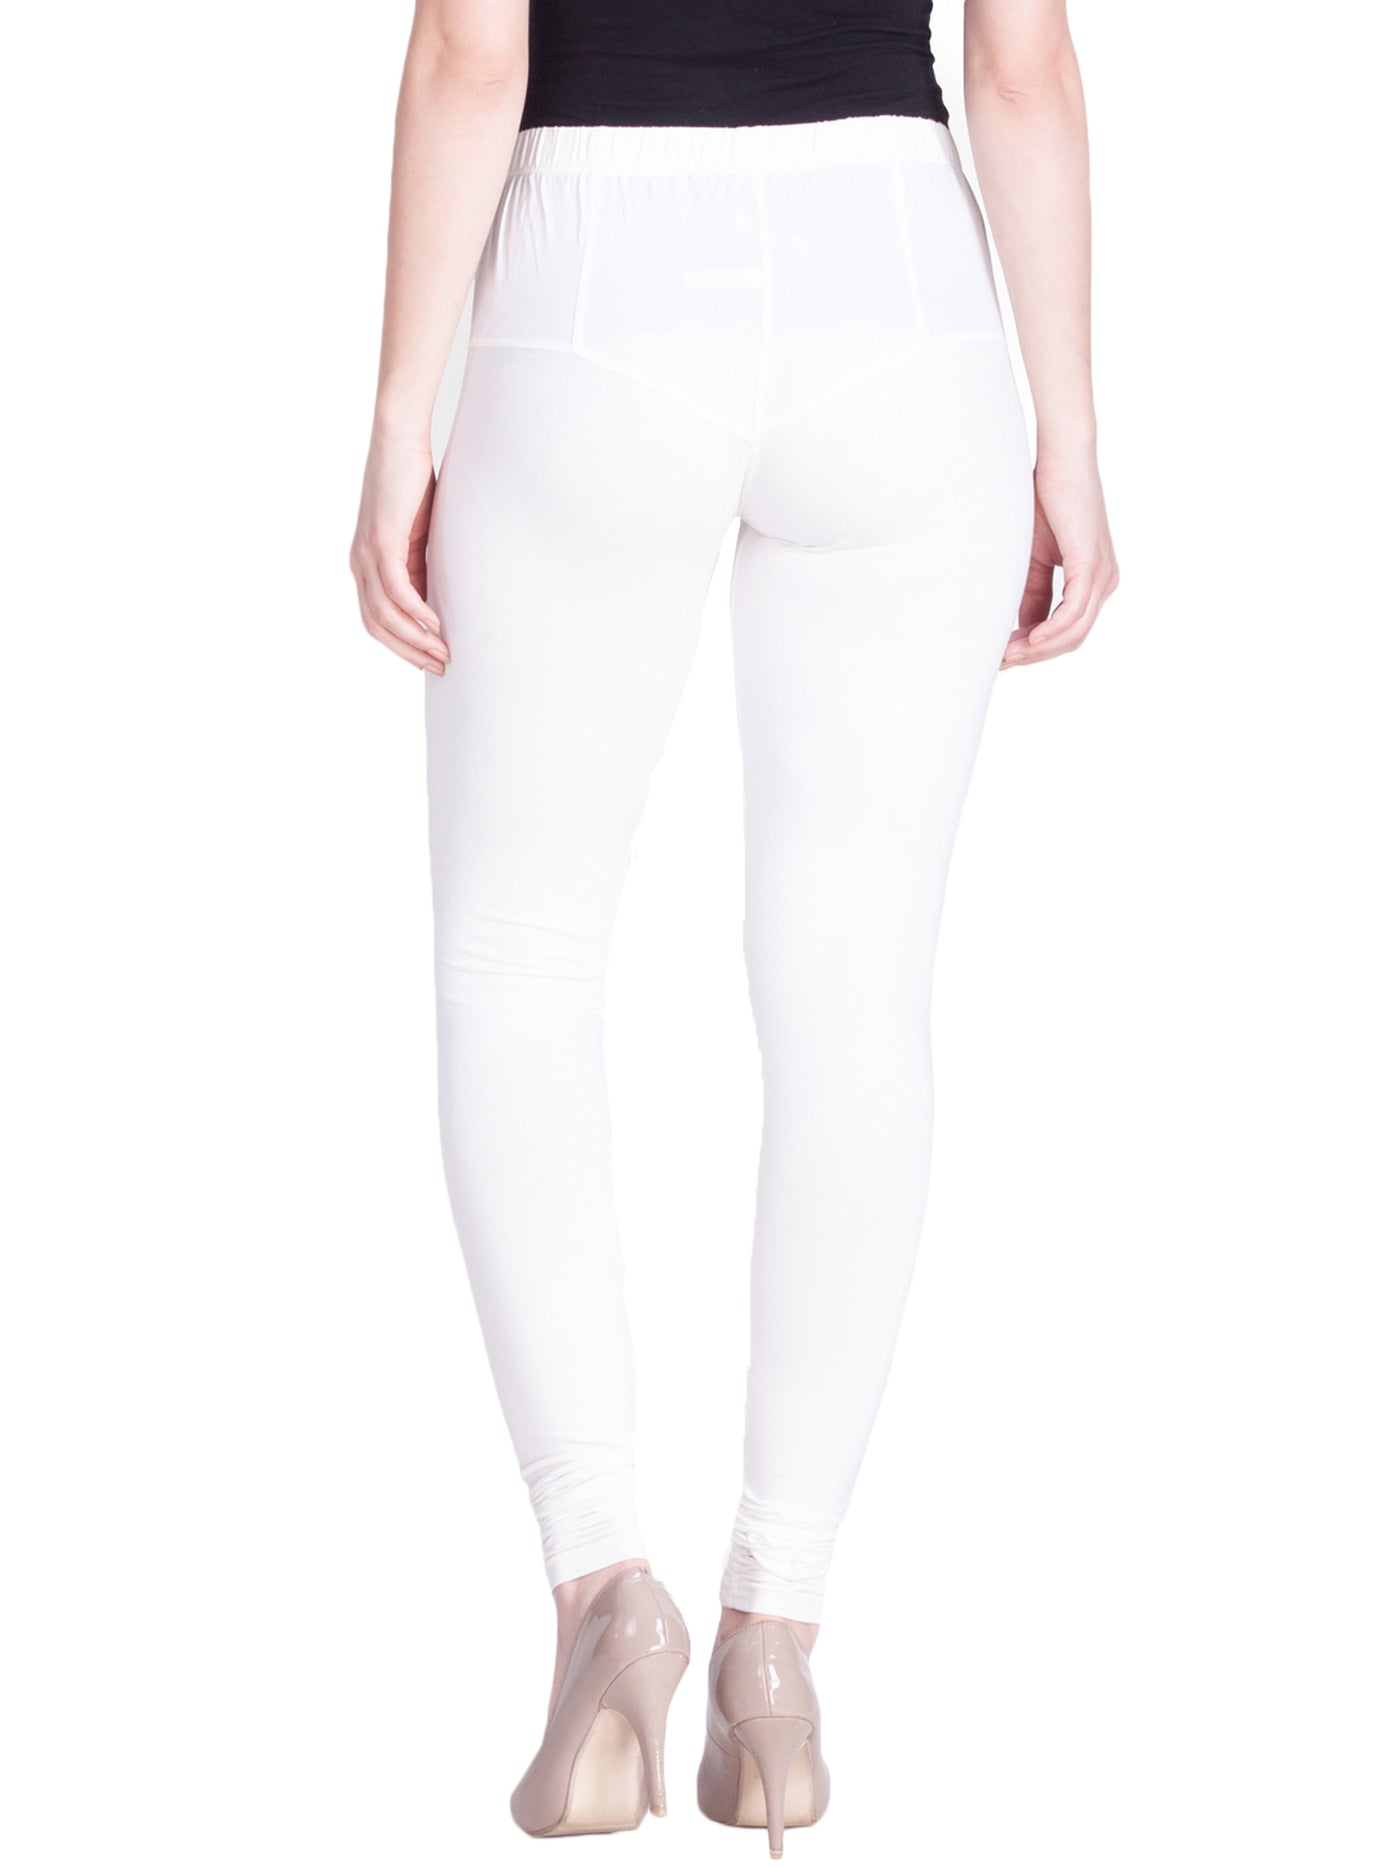 Indian Comfortable Wear All Day Long And Breathable White Color Cotton Lycra  Leggings For Ladies at Best Price in Kotdwara | New Look Garment